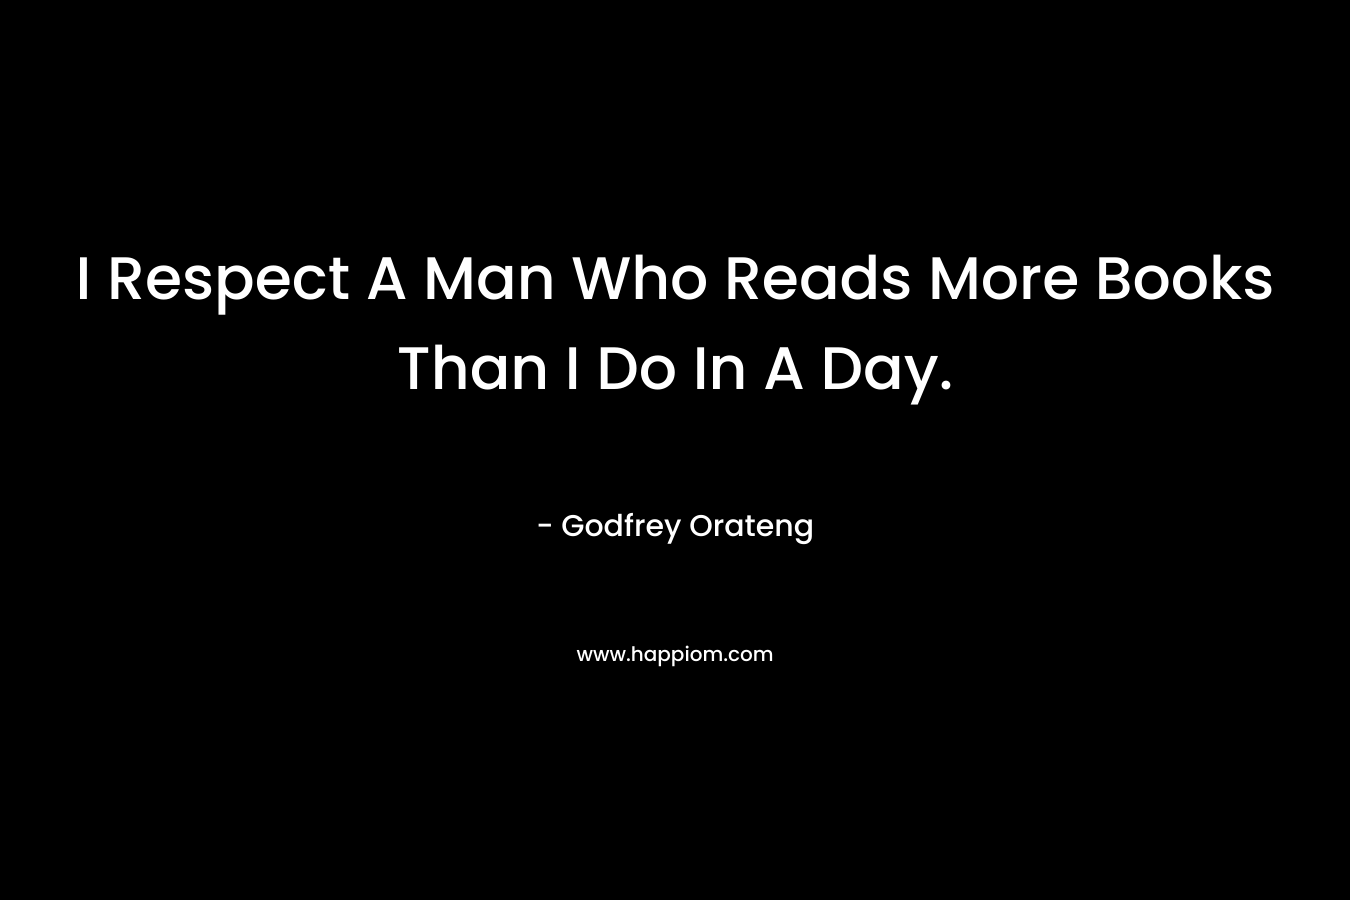 I Respect A Man Who Reads More Books Than I Do In A Day.